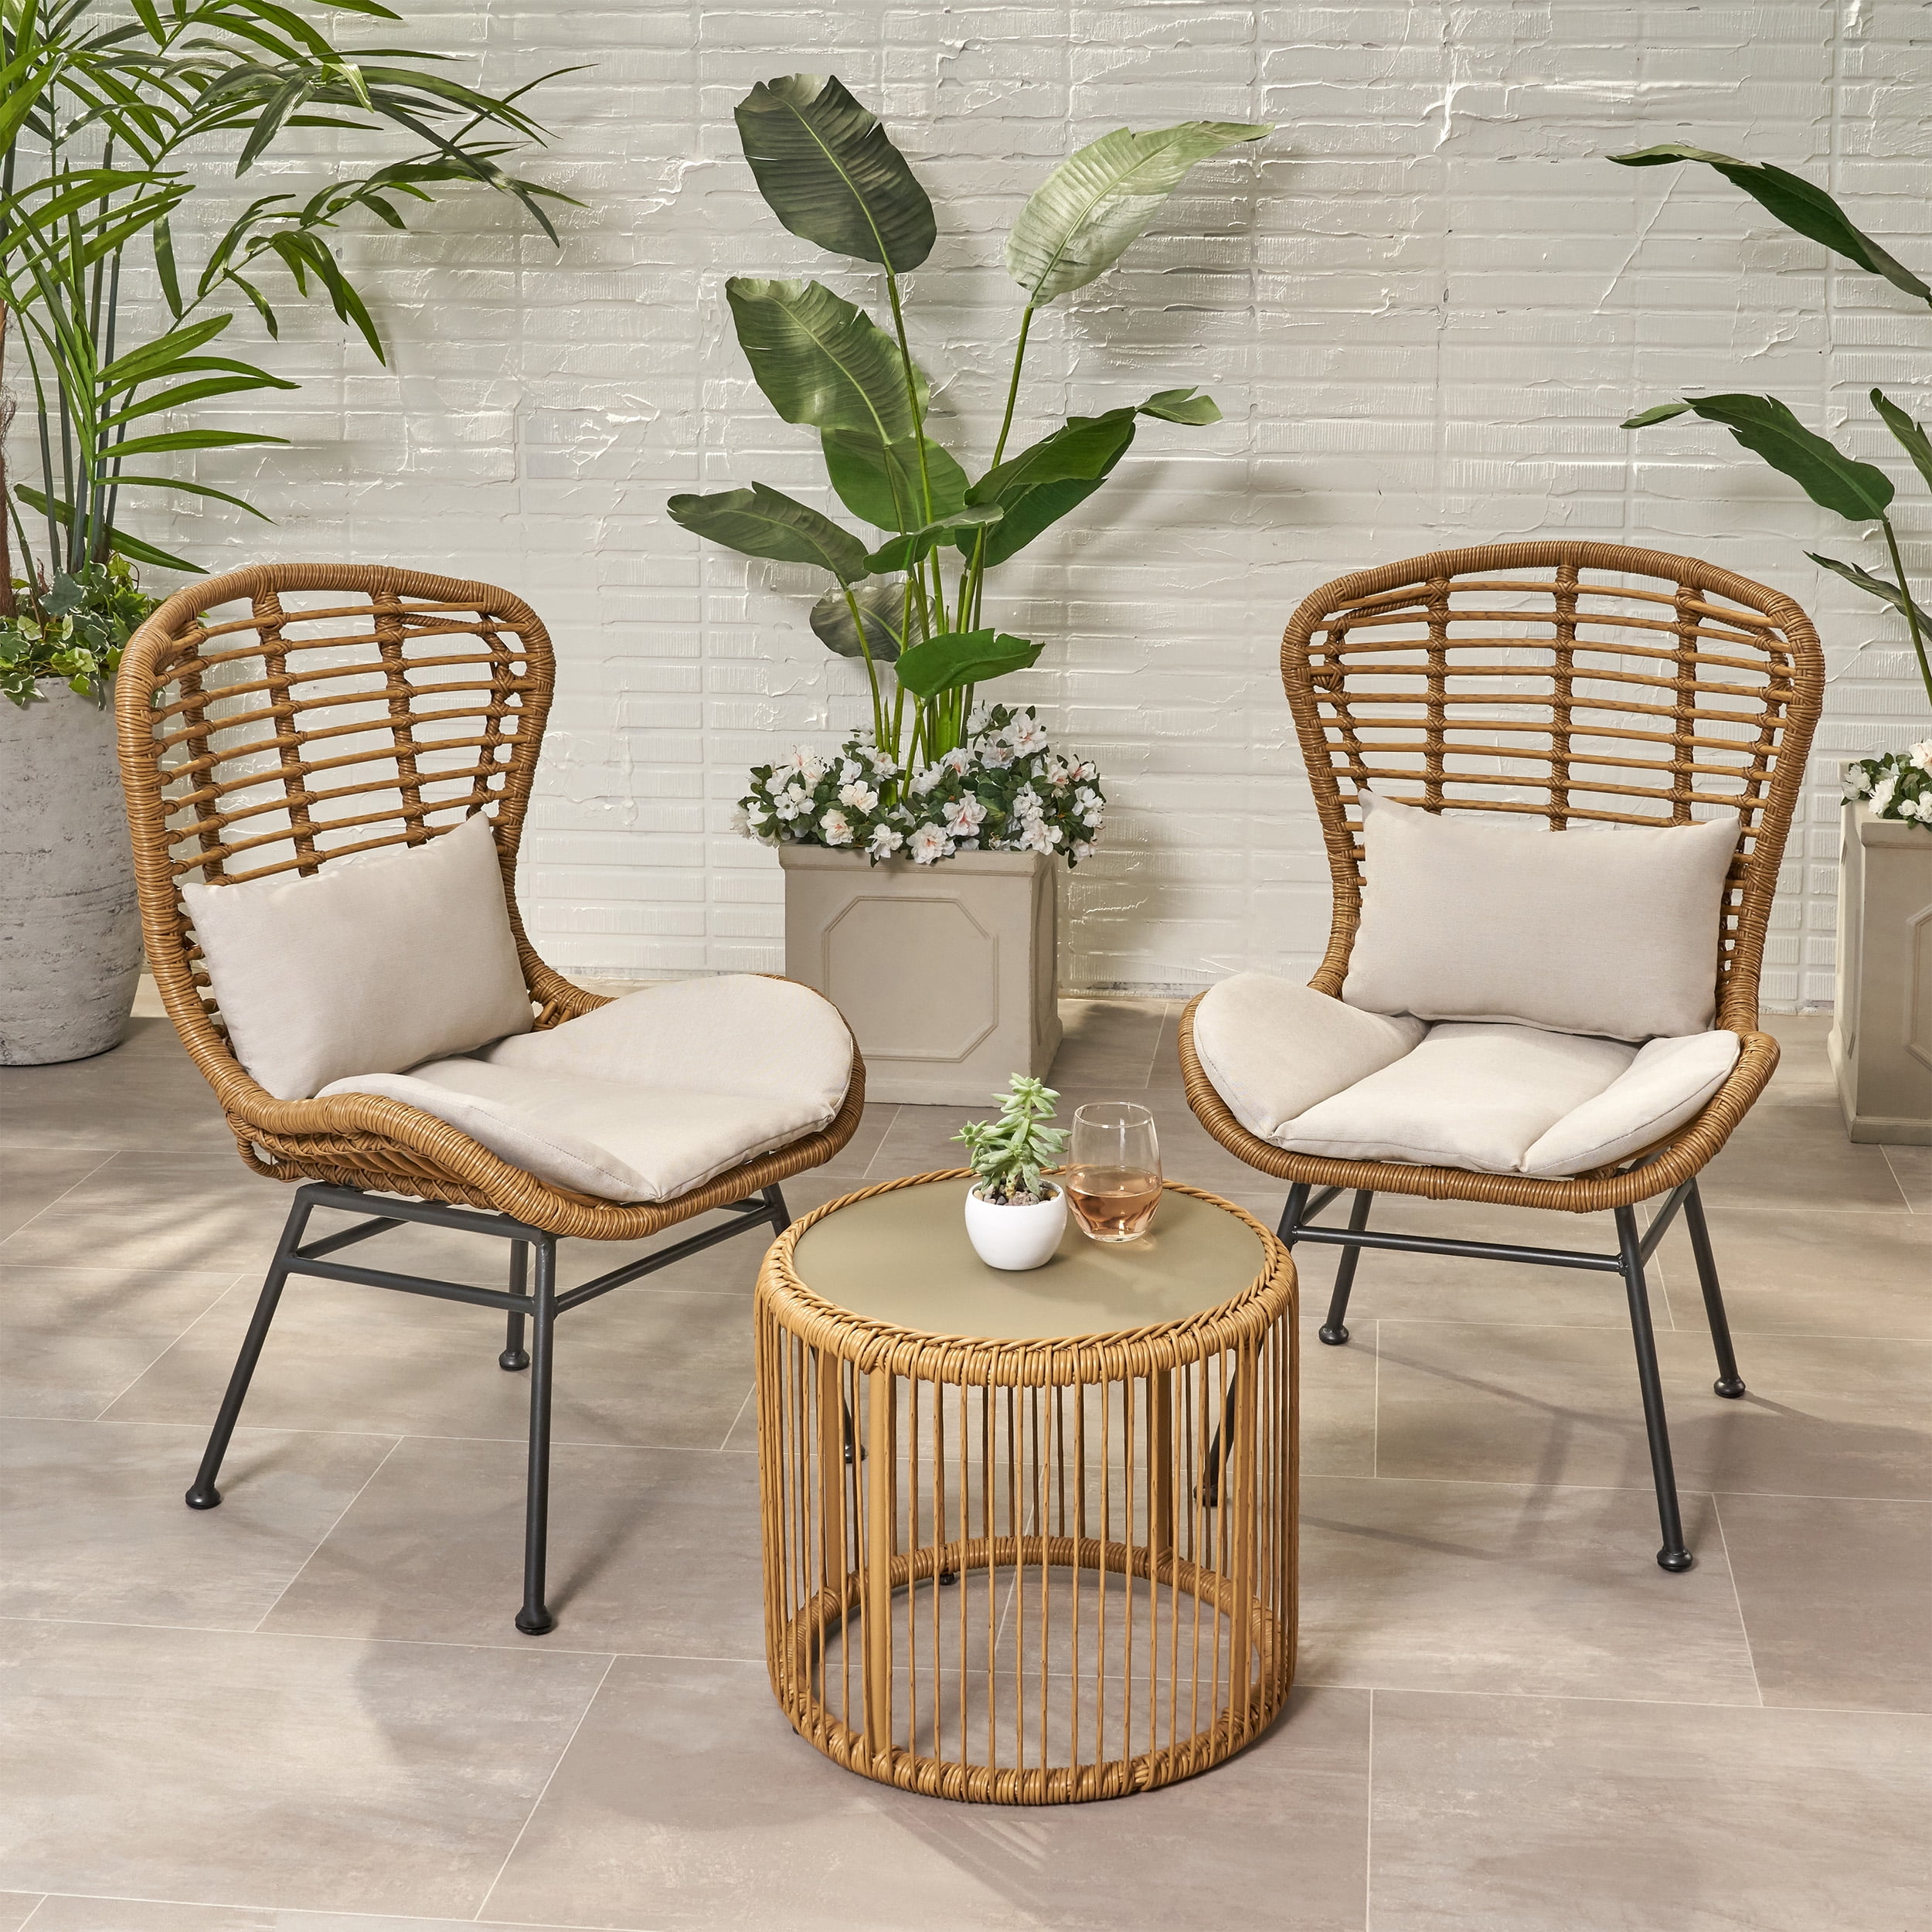 Bayne Outdoor Modern Boho 2 Seater Wicker Chat Set with Side Table, Light  Brown, Beige and Black - Walmart.com